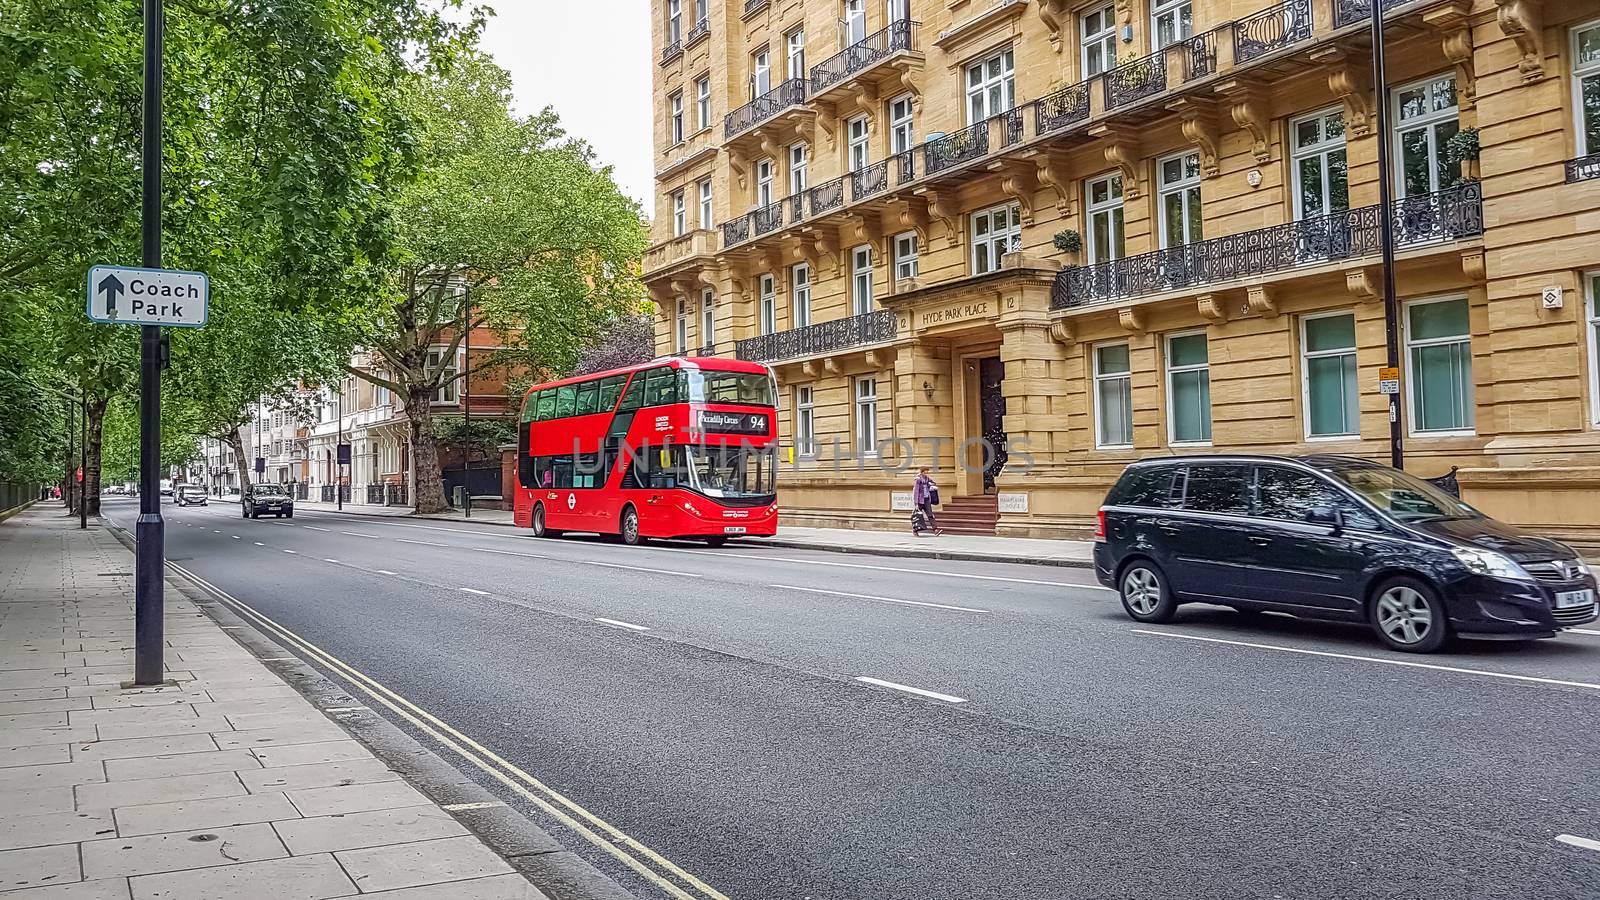 London, UK - July 8, 2020: Modern red double-decker bus passing by Hyde Park Place building in central London by DamantisZ